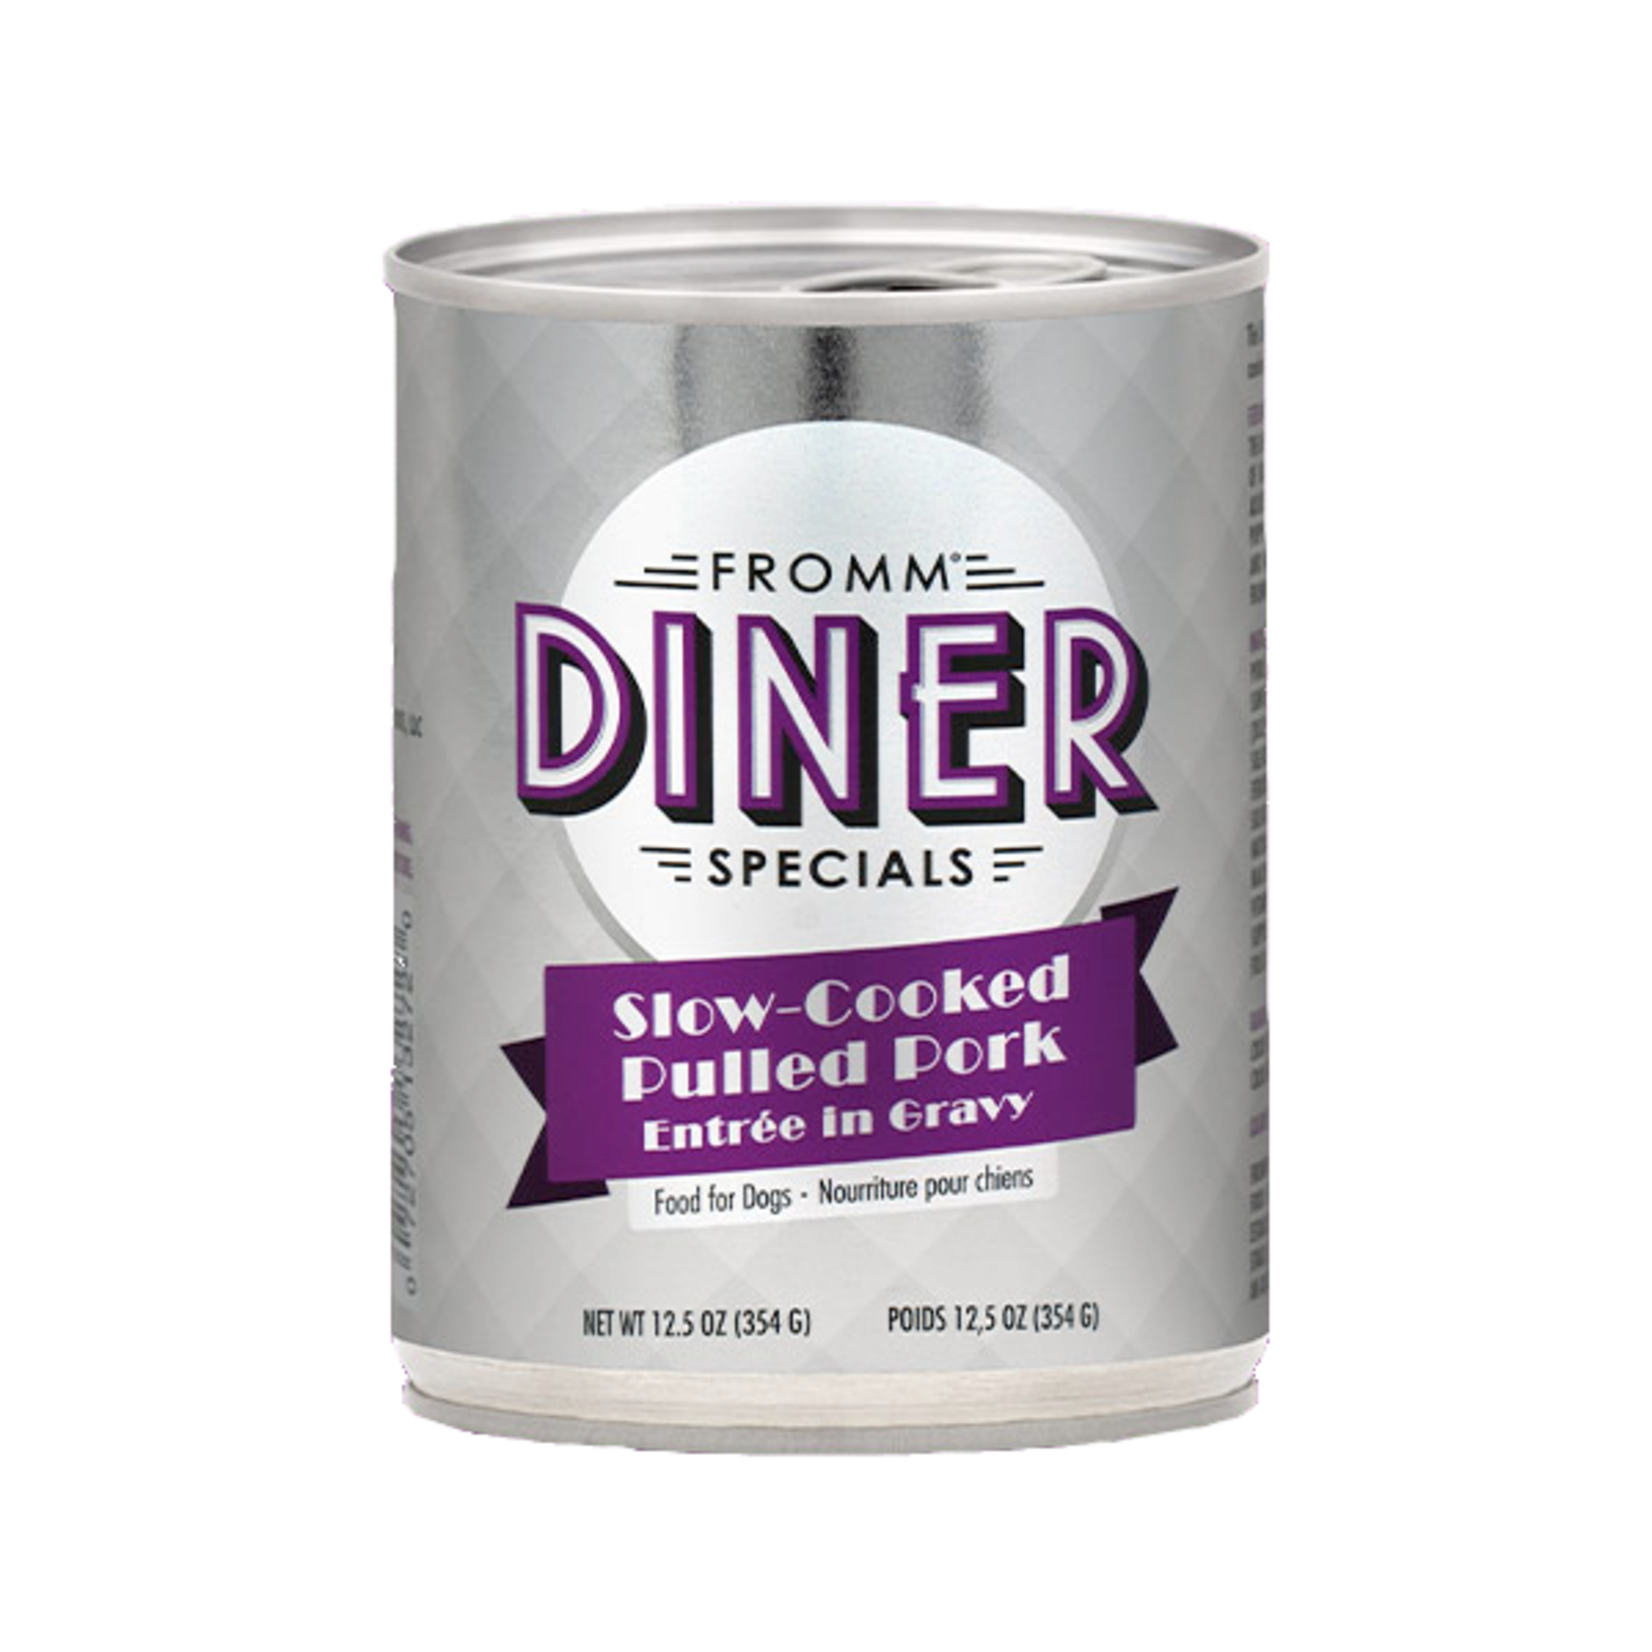 Fromm Fromm Wet Dog Food Diner Specials Slow-Cooked Pulled Pork in Gravy Entree 12oz Can Grain Free